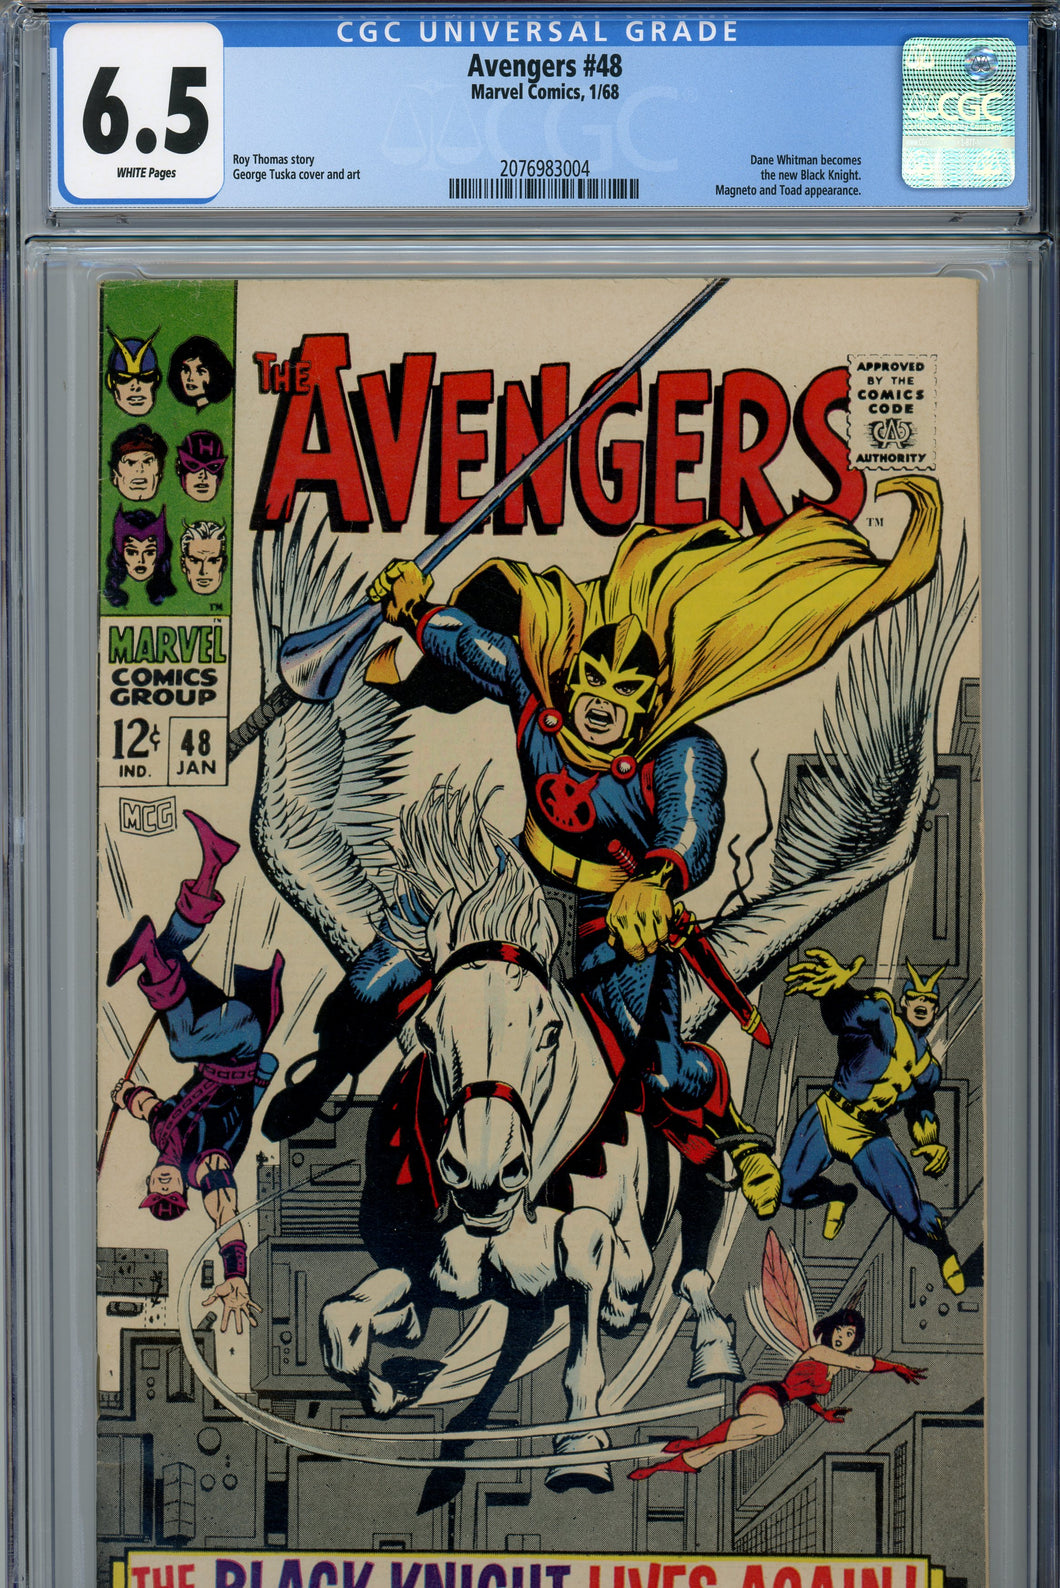 Avengers #48 CGC 6.5 1st Appearance of the New Black Knight